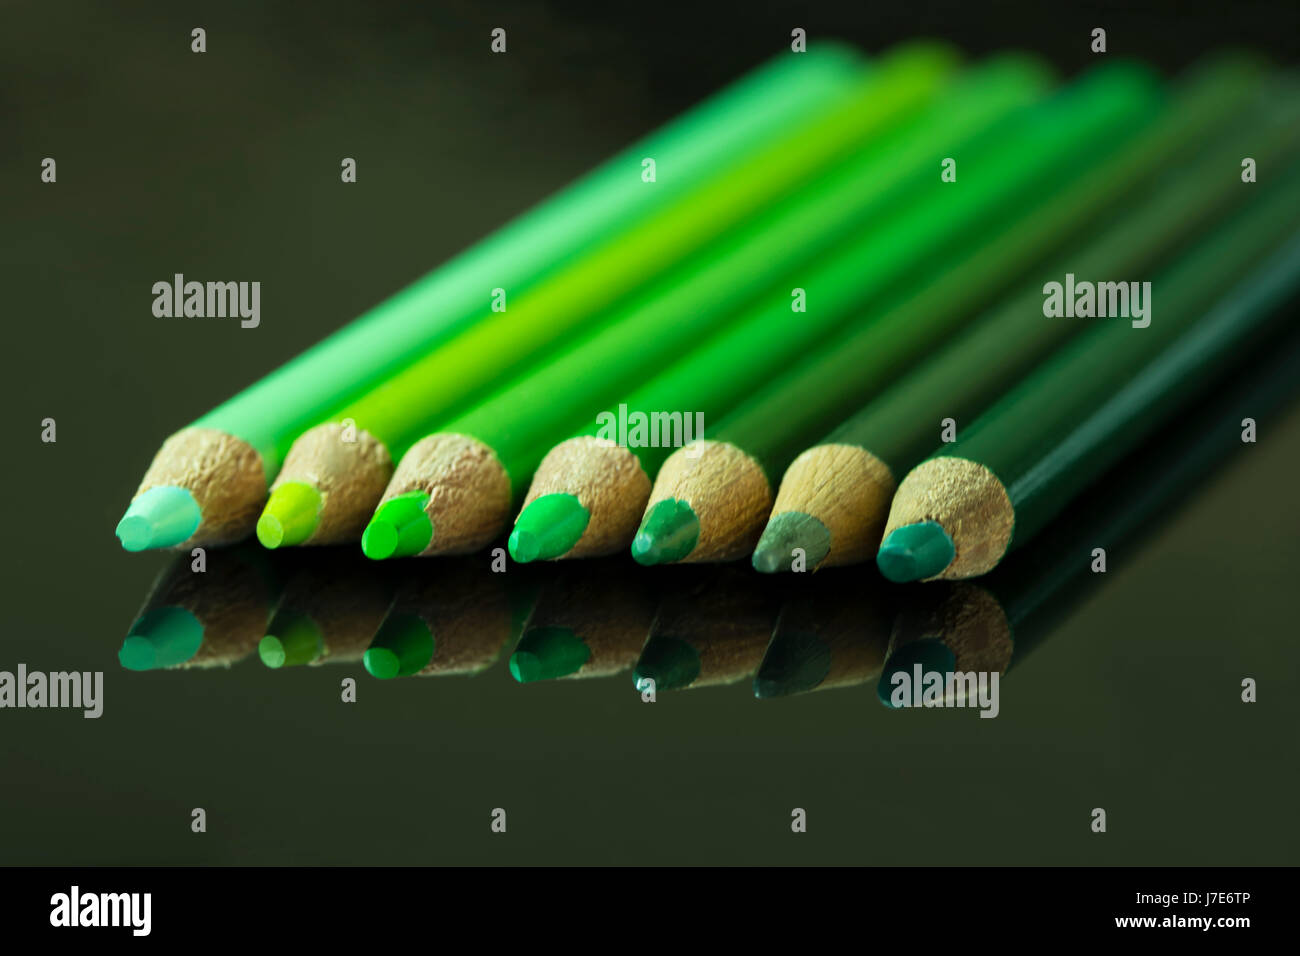 Seven green pencils of various shades and hues, lined up from light to dark on a black reflective surface. Stock Photo